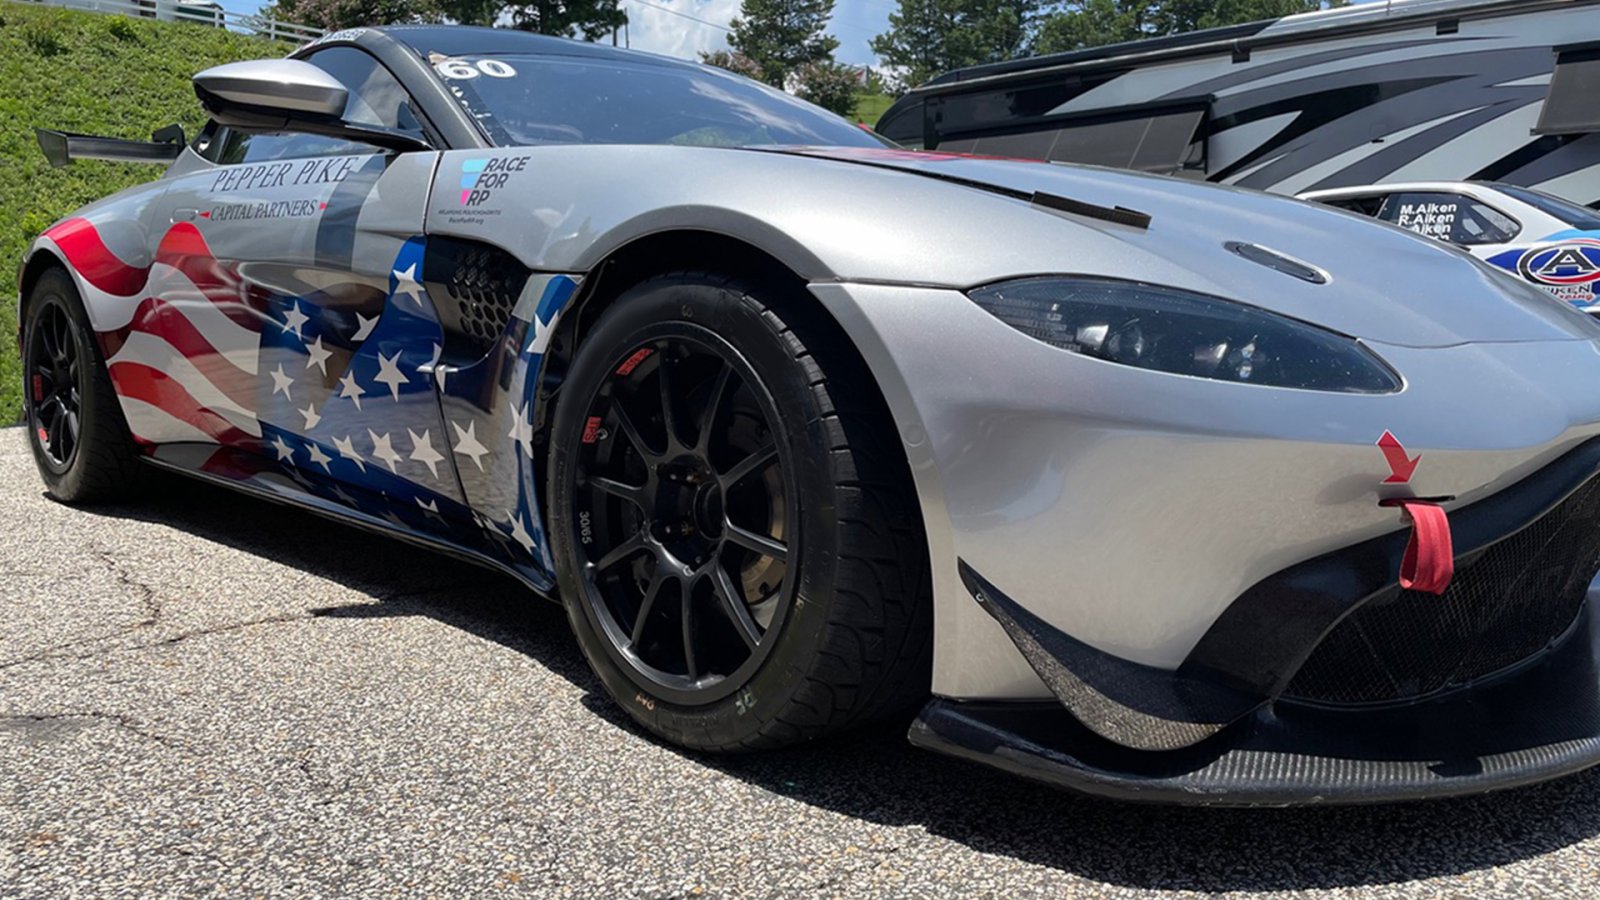 Mikel Miller to Pilot Automatic Racing’s Aston Martin for Remainder of 2021 GT4 America Program